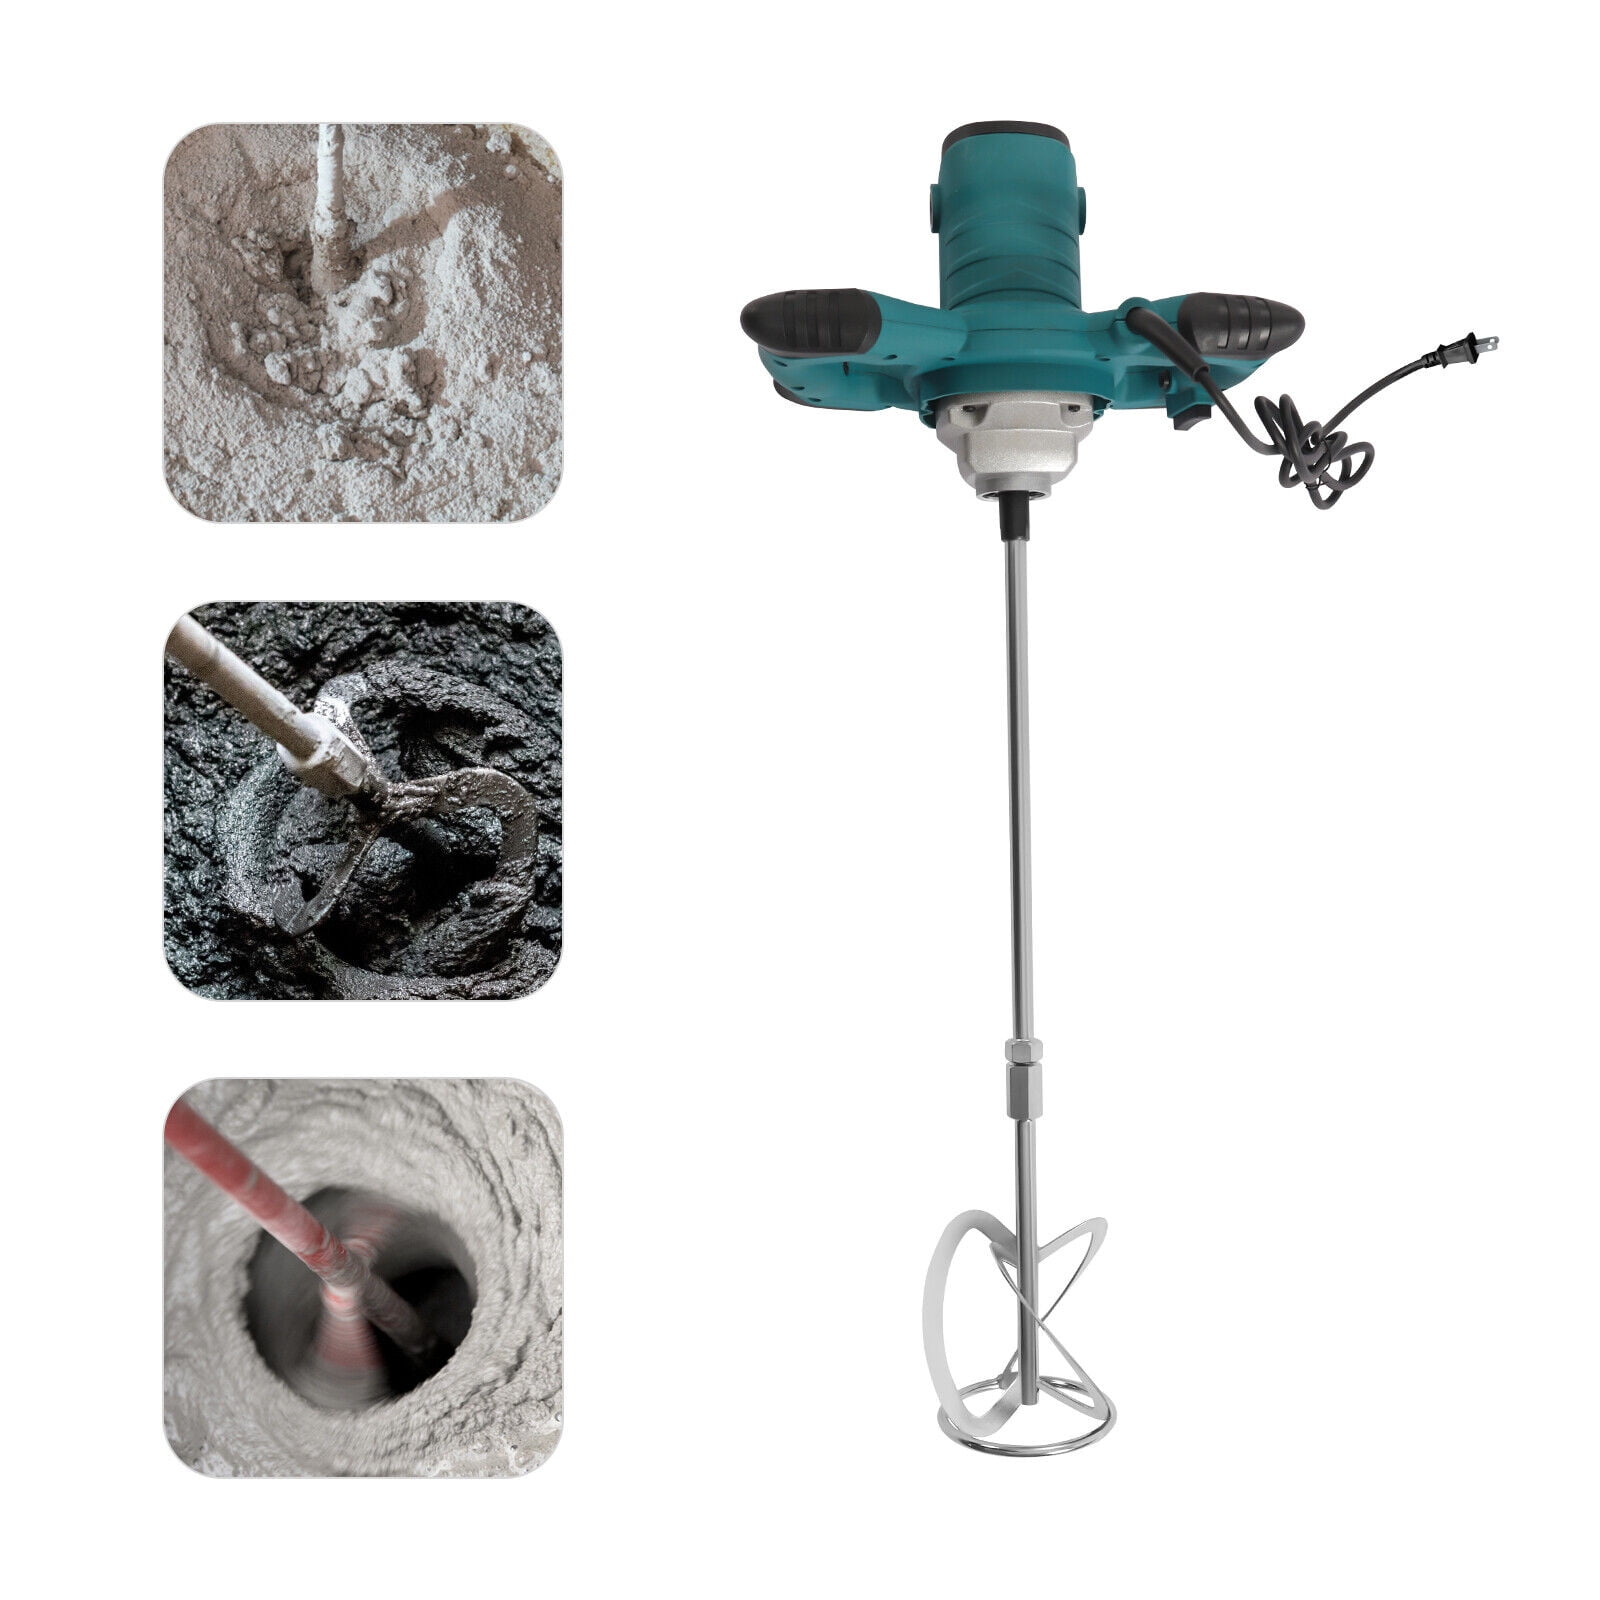 2600W Electric Hand-Held Cement Mixer Stirring Tool with Rod, Portable  Mortar Mixer, 6 Adjustable Speed Paint Mixer, 110V Paddle Drill Mixer,  Electric